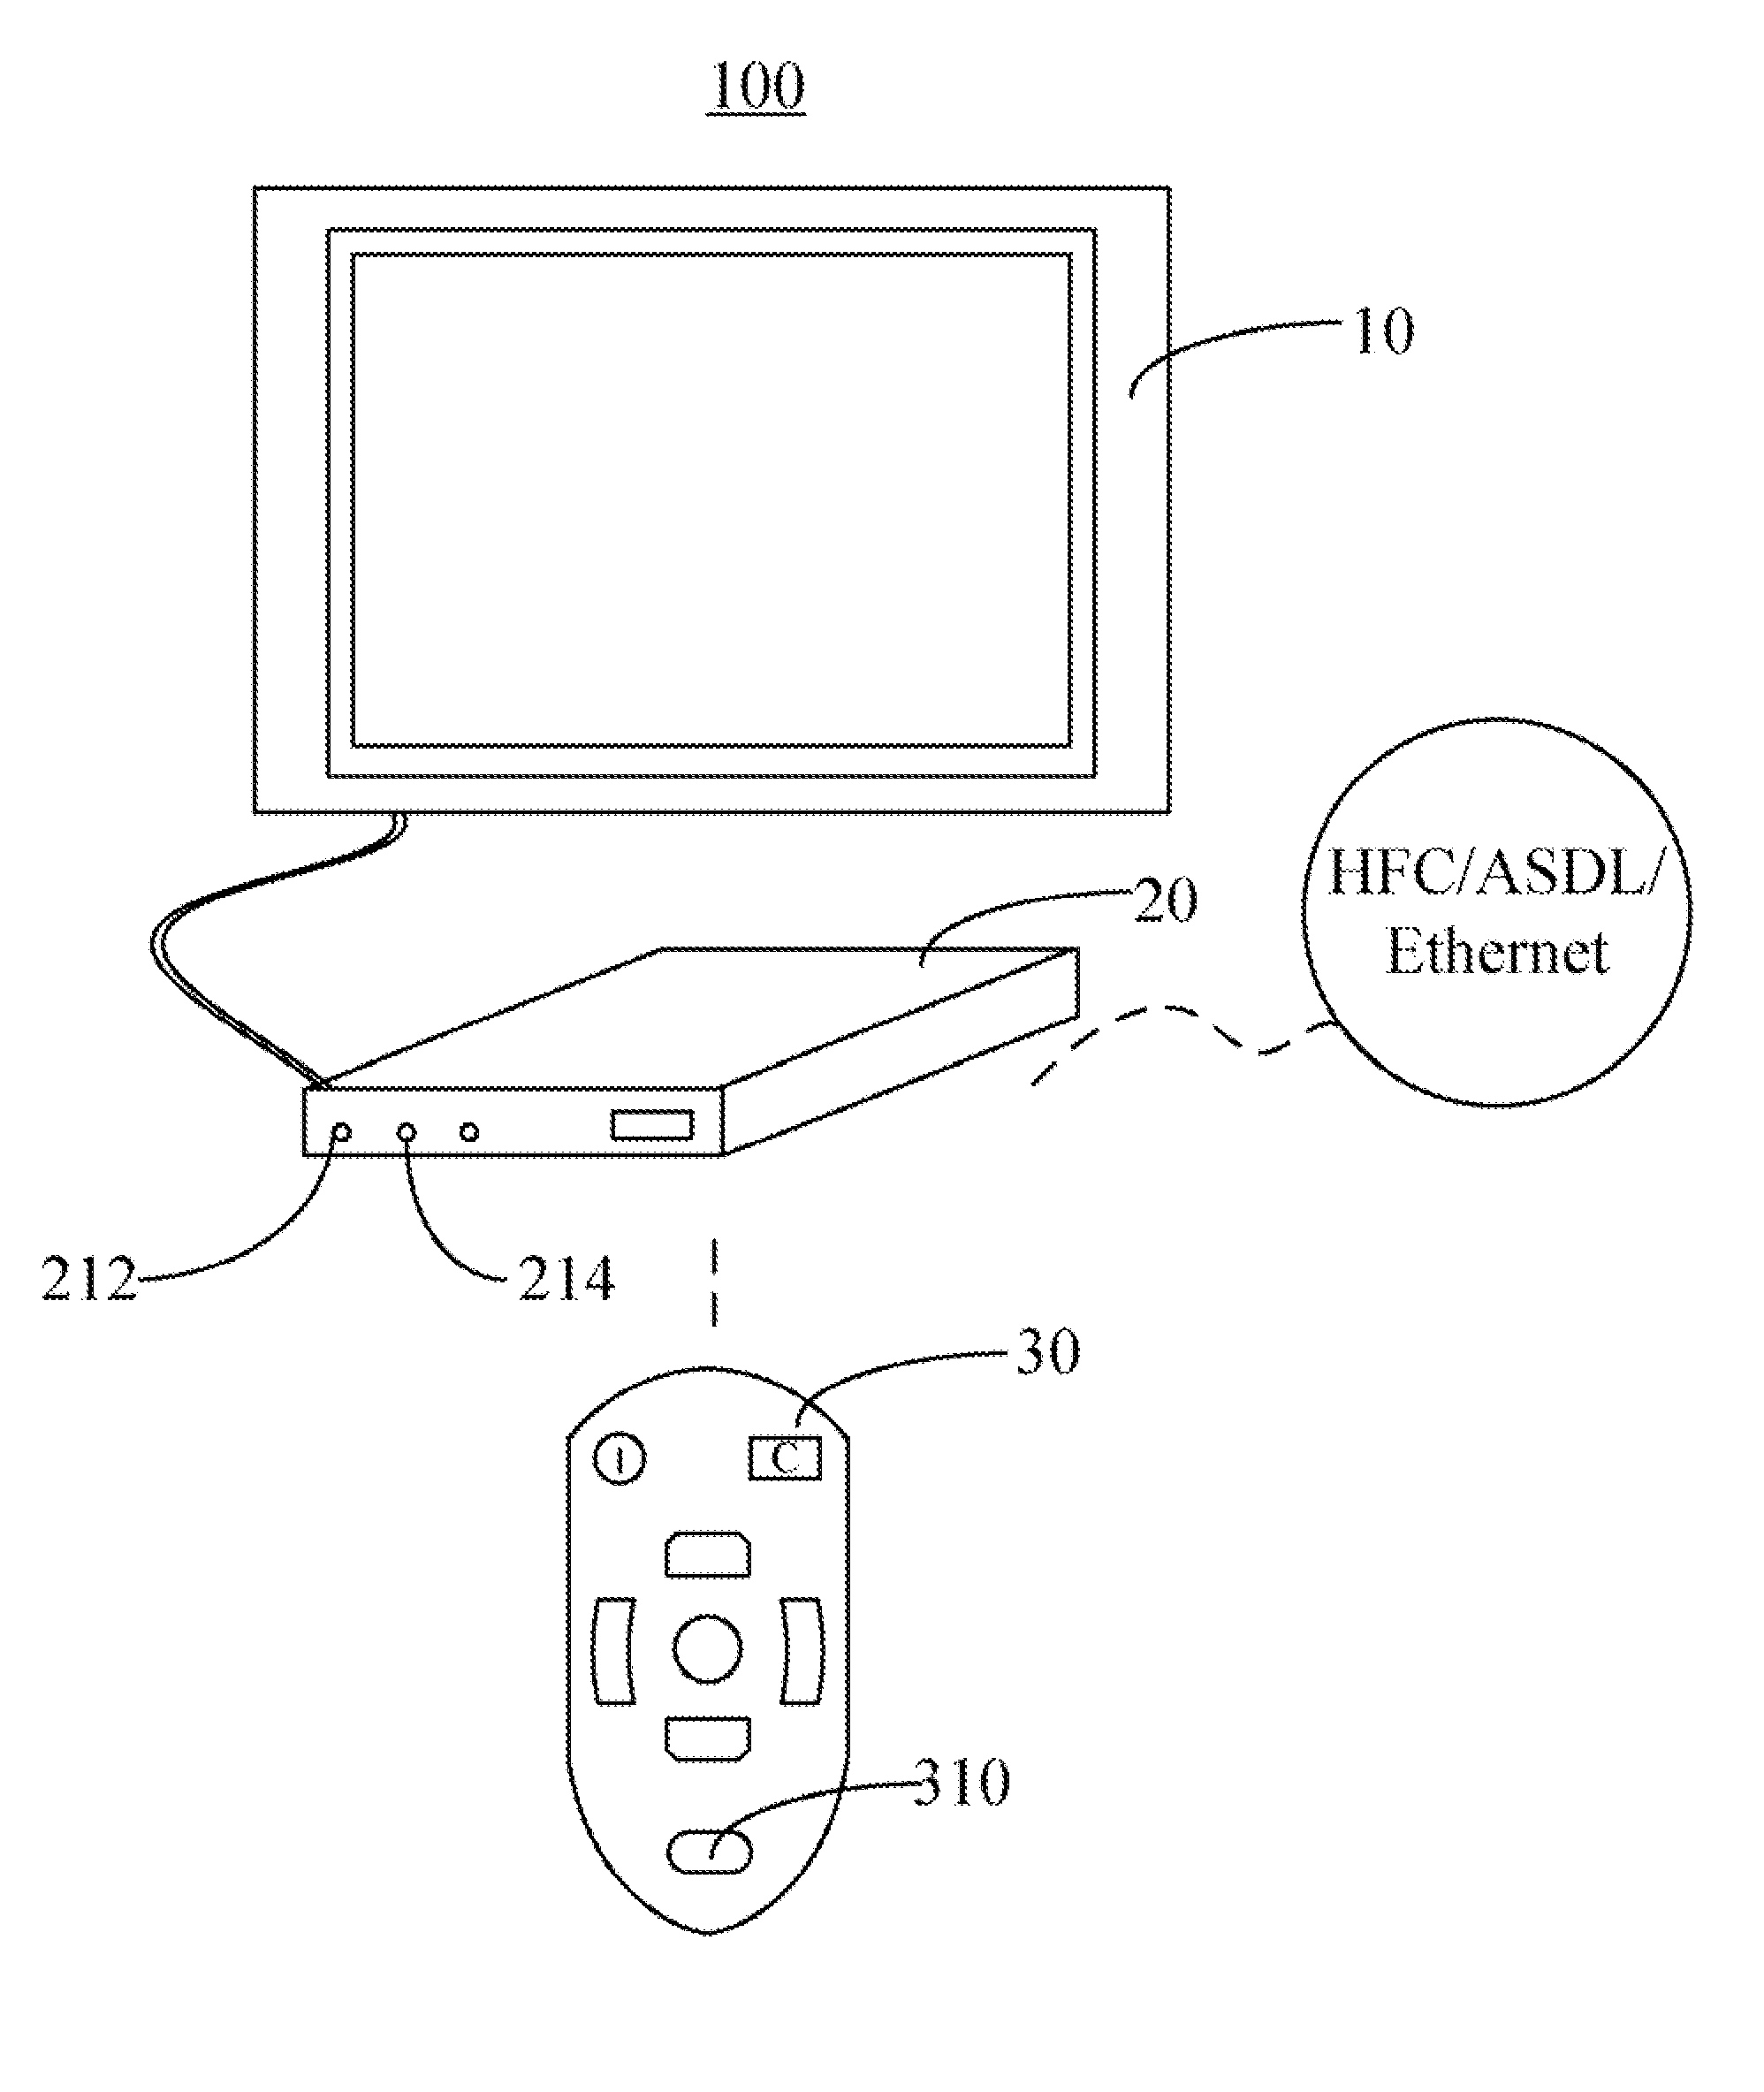 Set-top box and entertainment system using the same